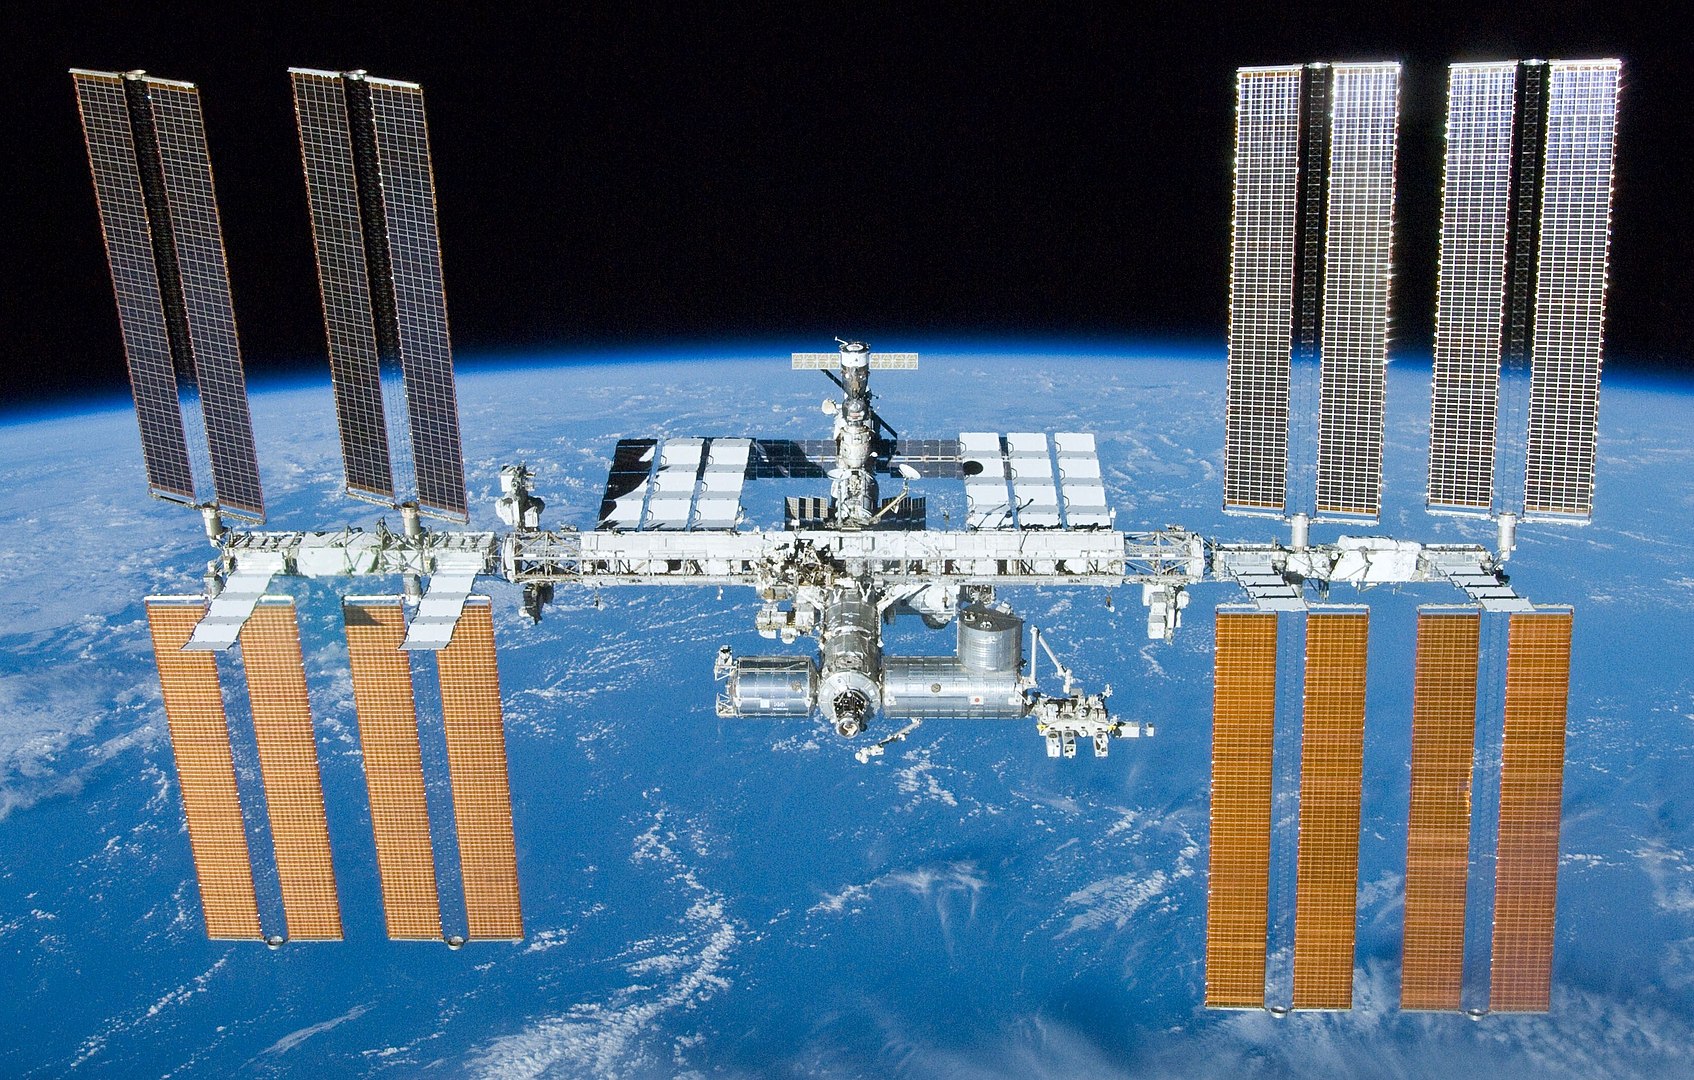 The International Space Station image from https://en.wikipedia.org/wiki/File:International_Space_Station_after_undocking_of_STS-132.jpg is in the Public Domain.